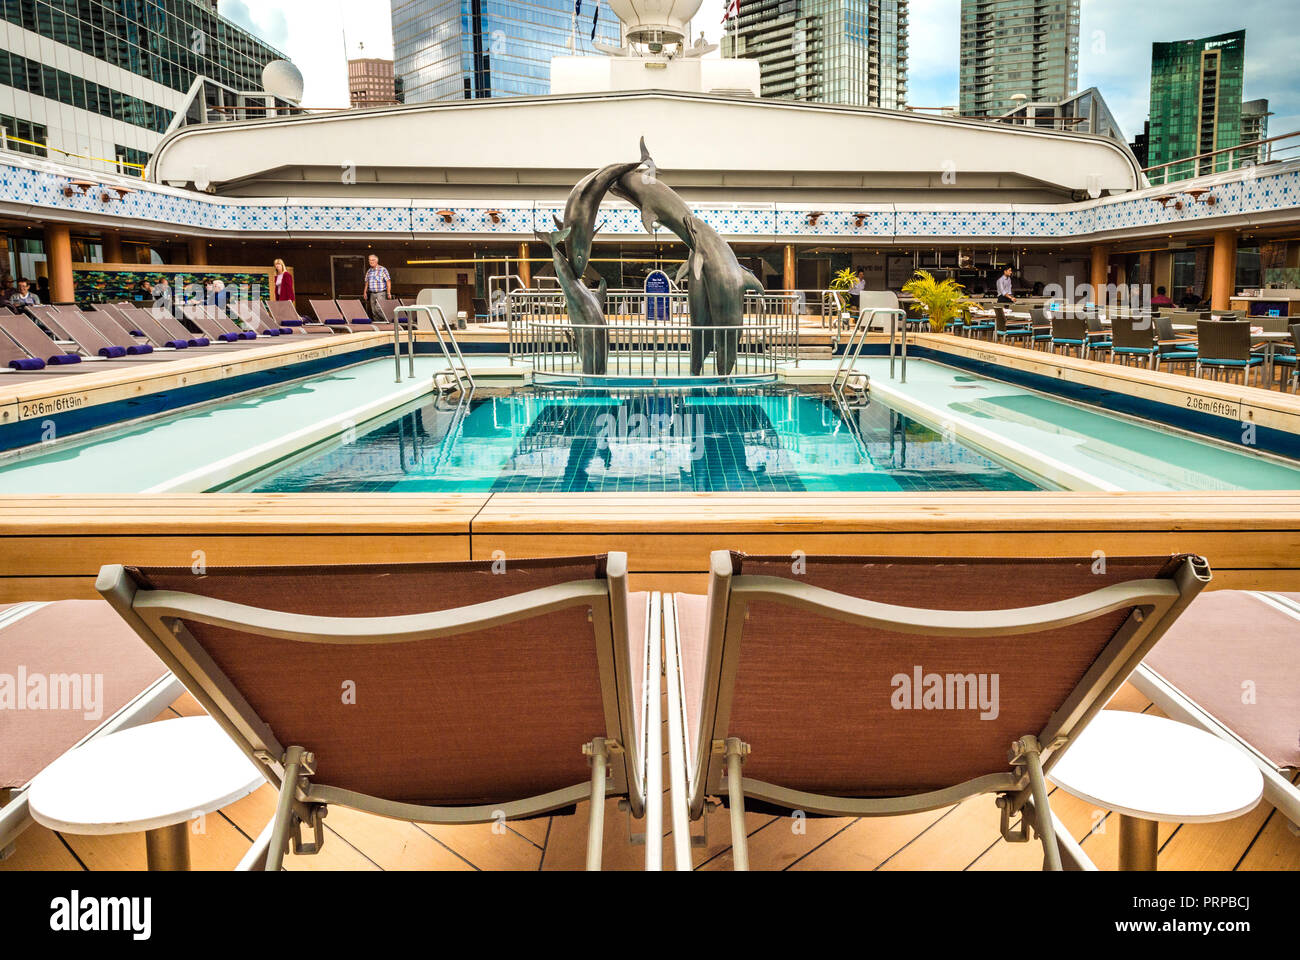 Lido Deck swimming pool under open retractable Magradome roof. The